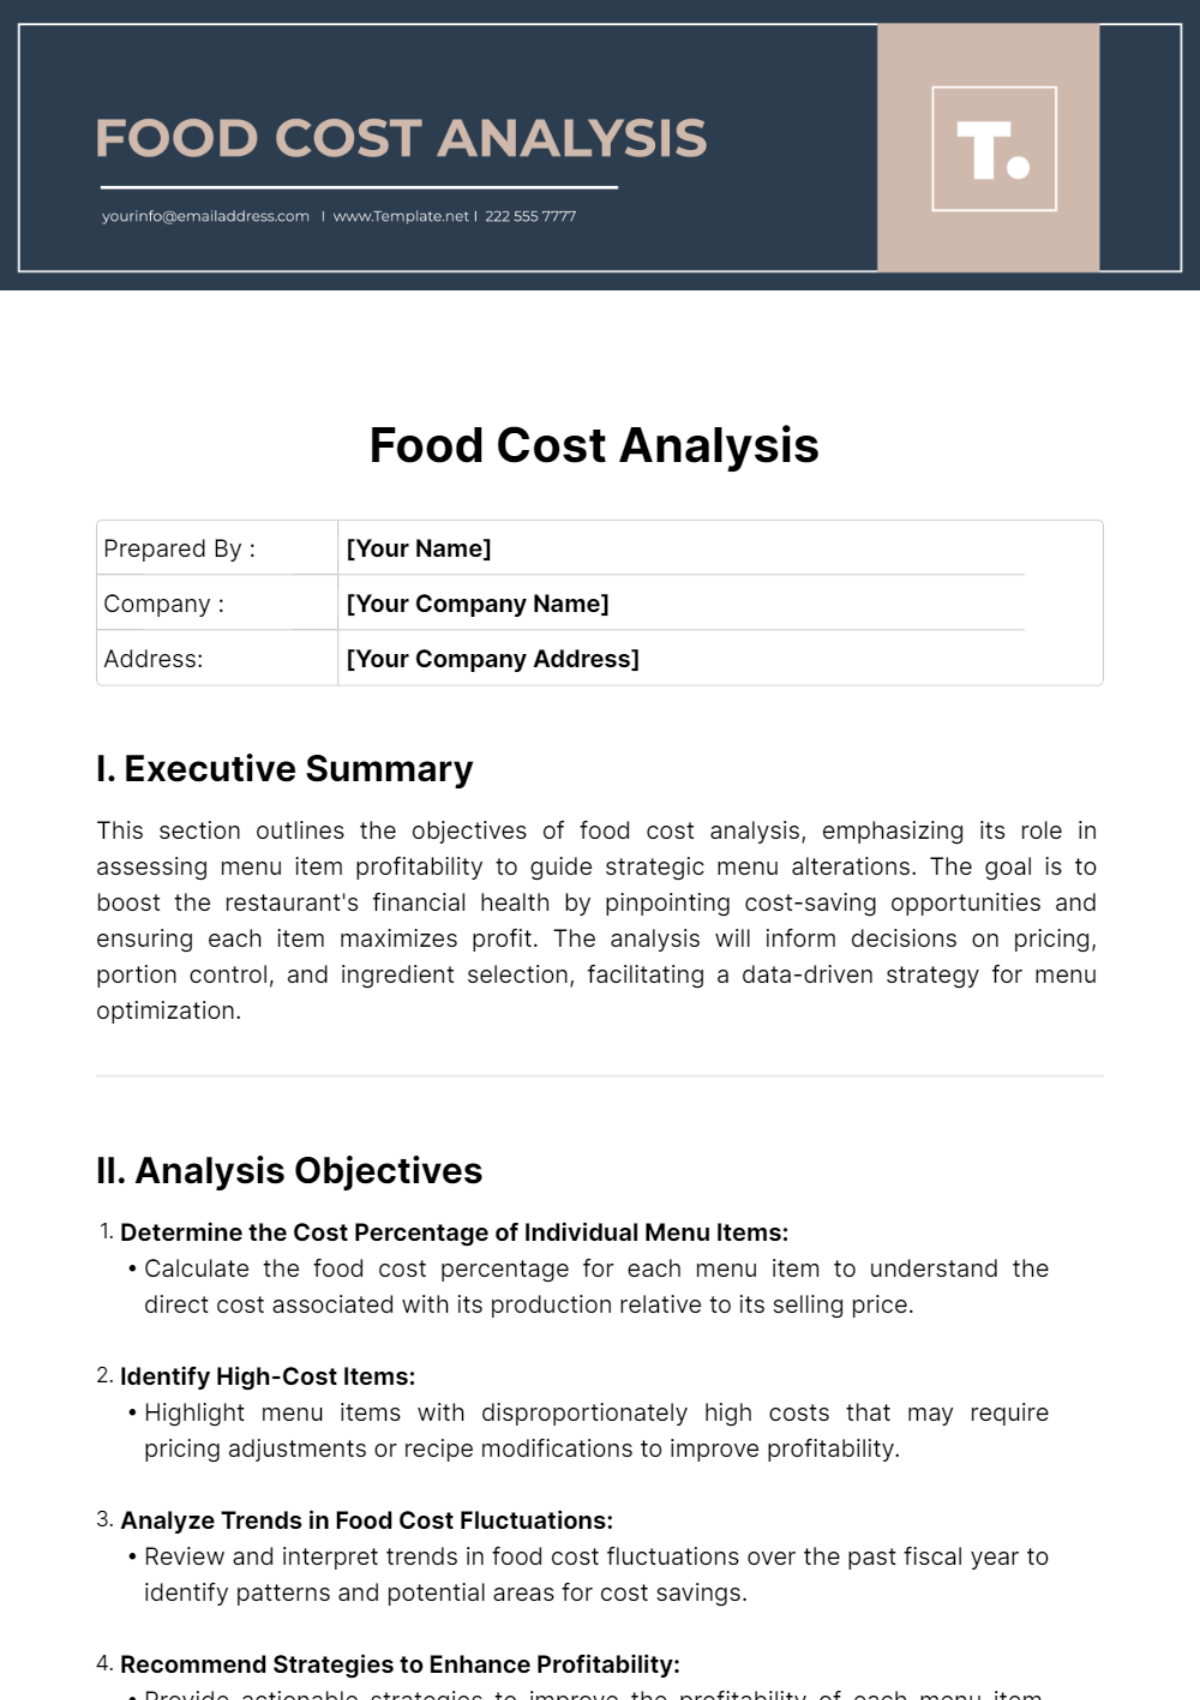 Food Cost Analysis Template